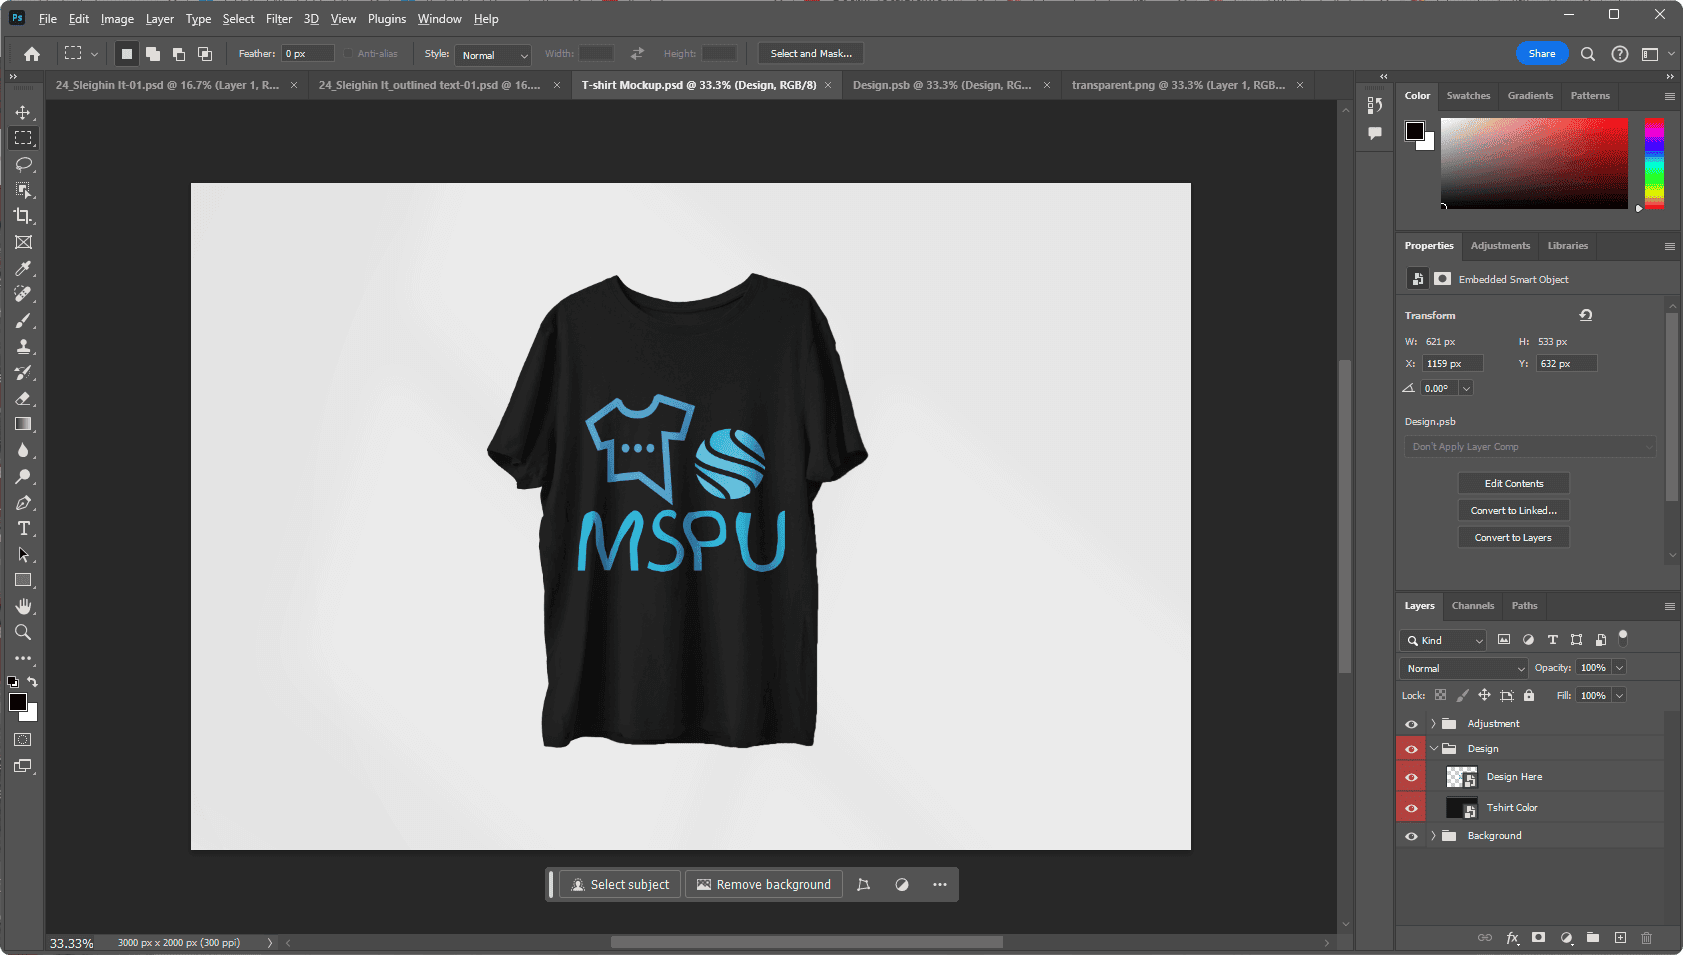 T-Shirt Design Software for PC: Top 7 Options for Windows 11 and 10